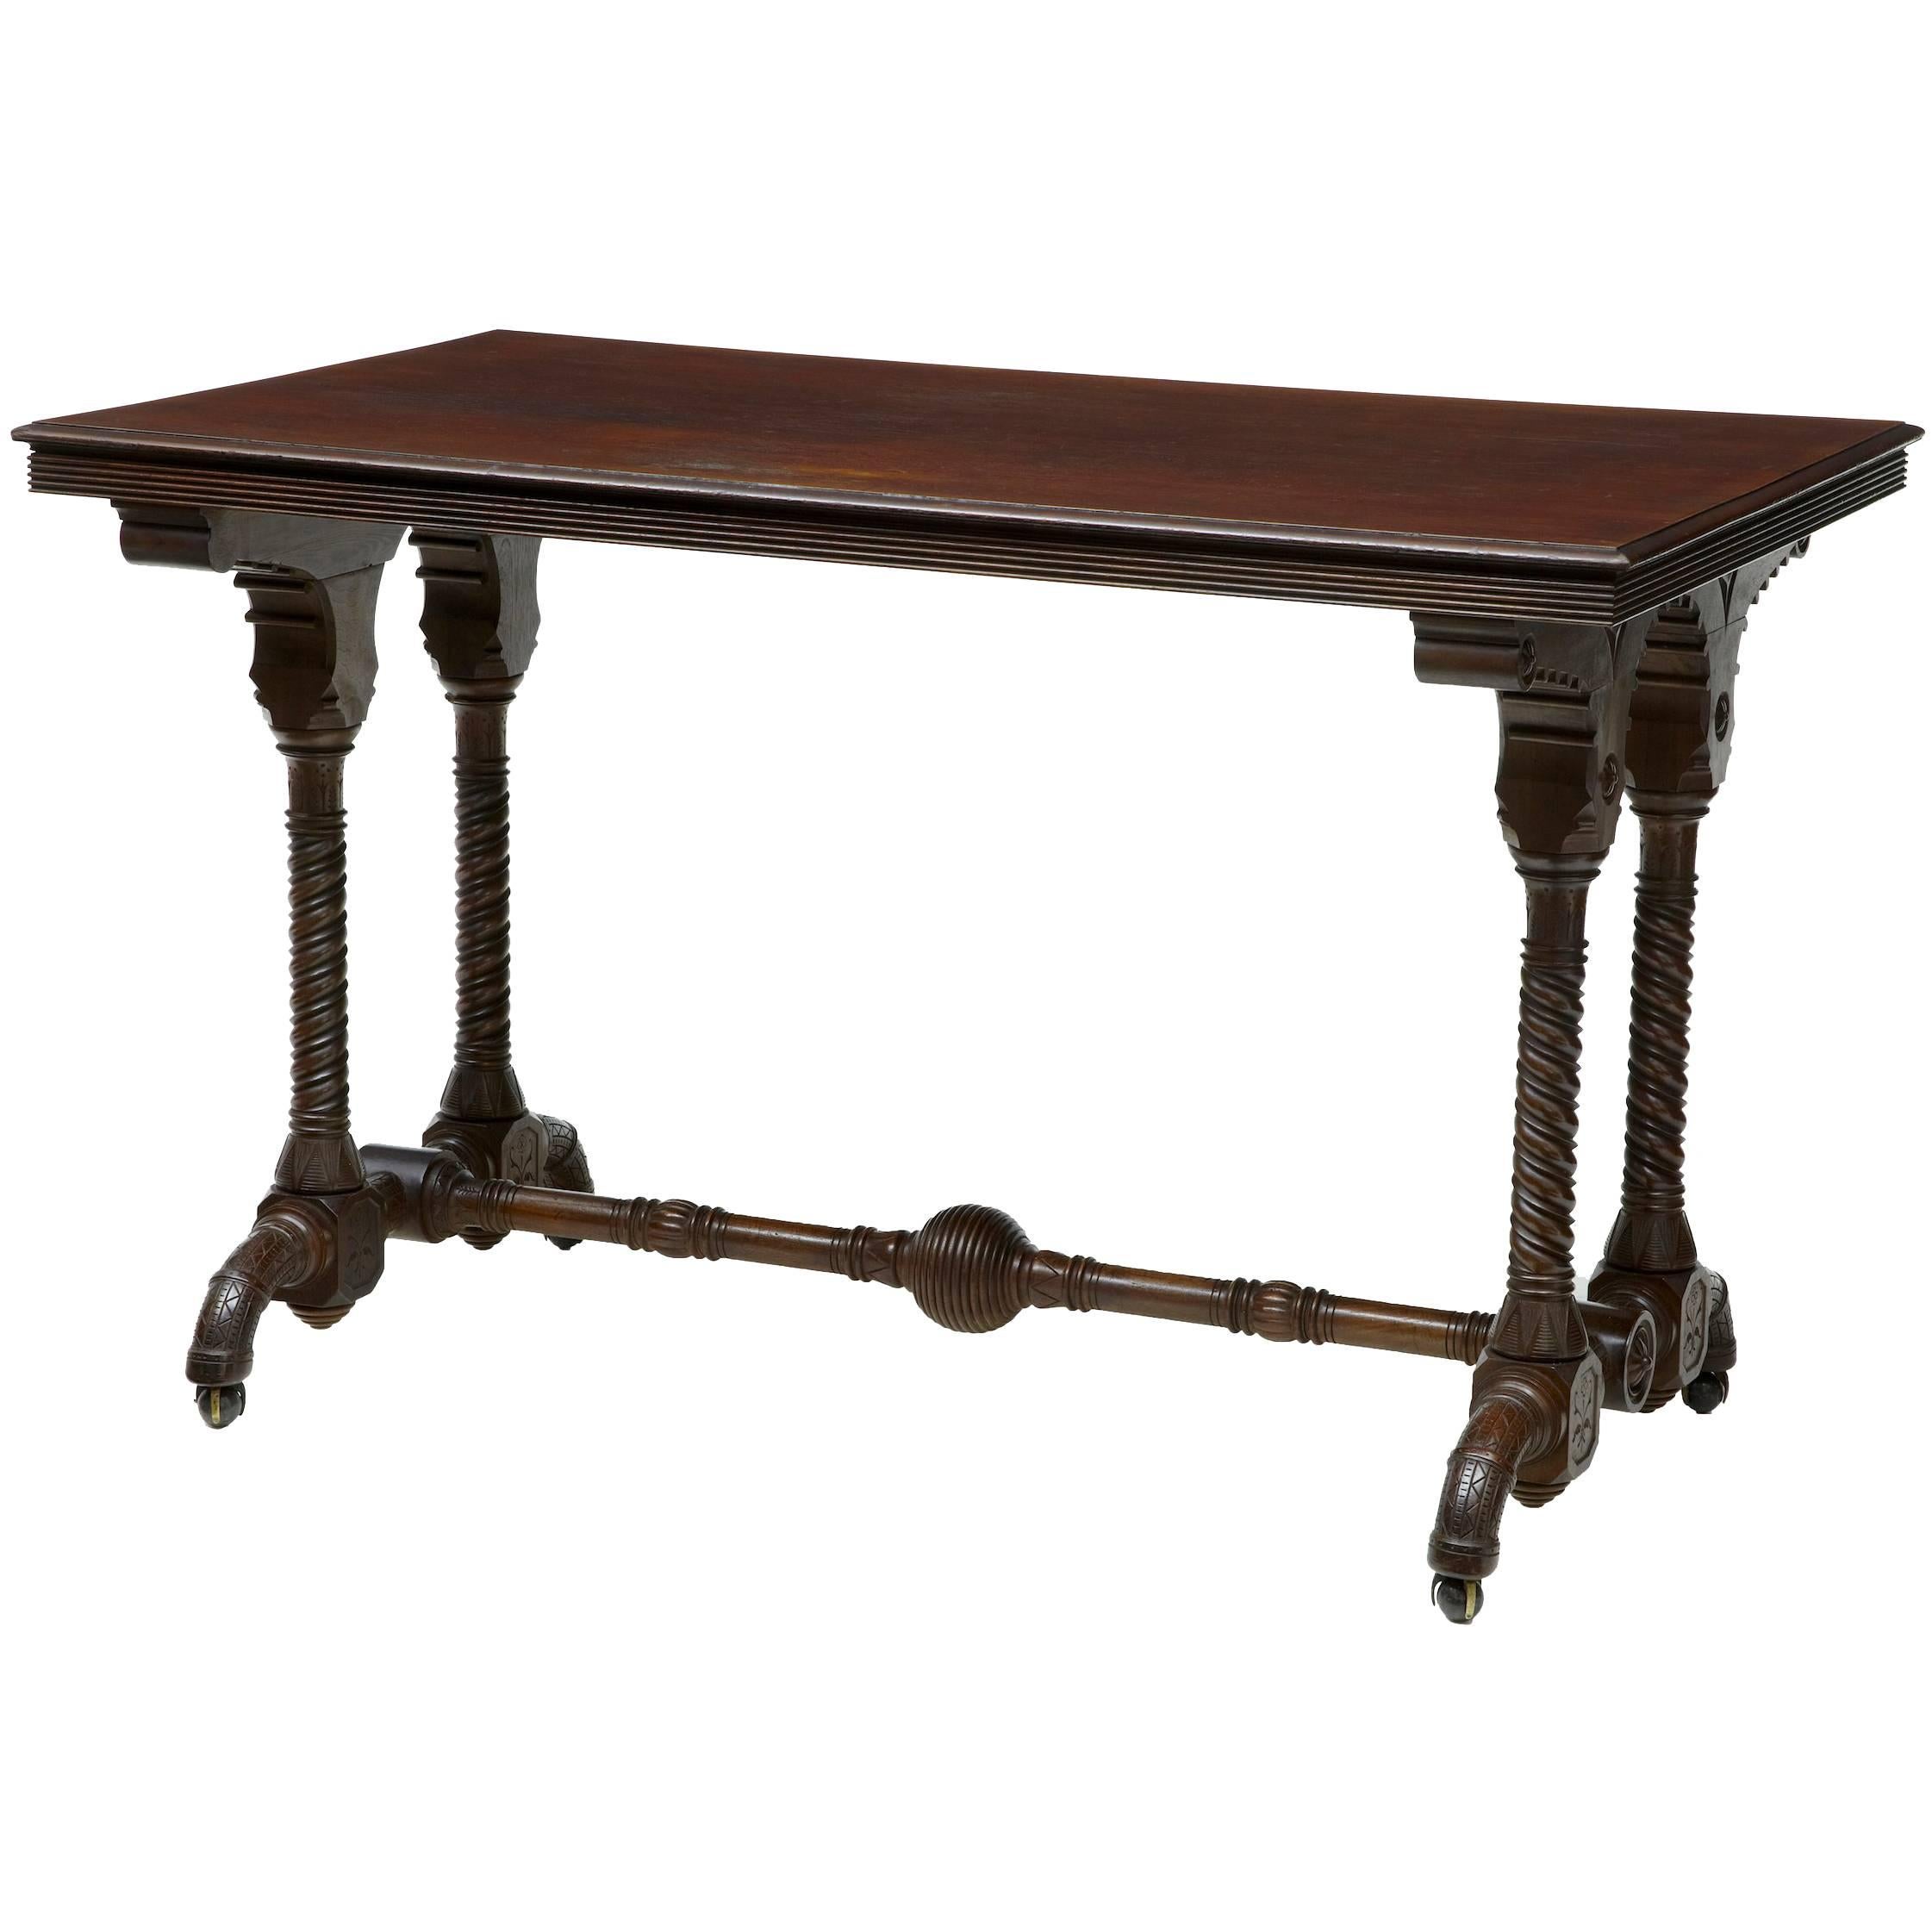 Unusual Arts & Crafts 19th Century Carved Walnut Library Table